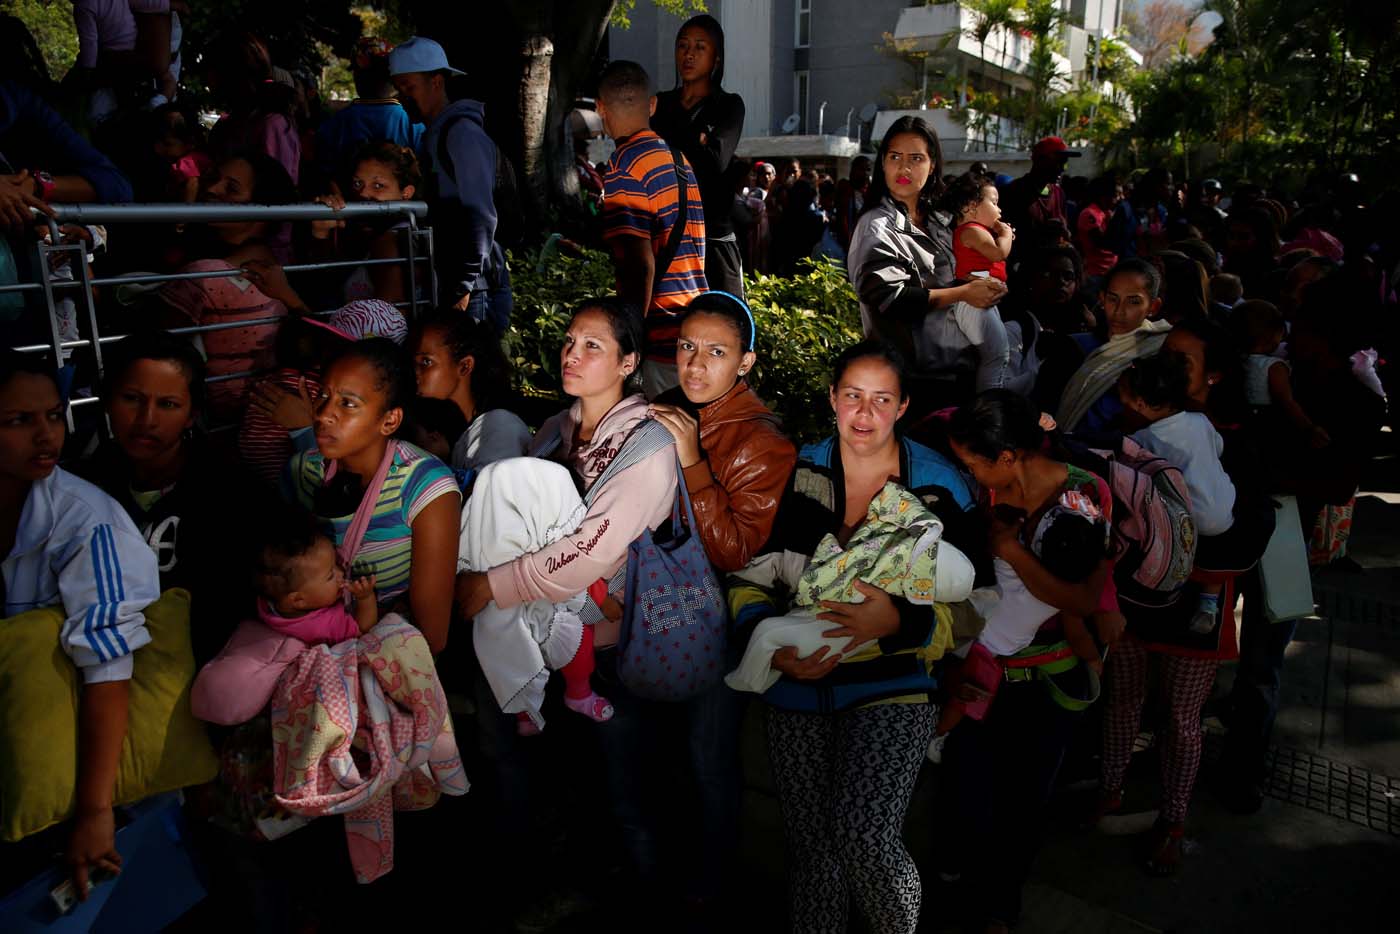 Women carrying babies queue as they try to buy diapers outside a pharmacy in Caracas, Venezuela March 18, 2017. REUTERS/Carlos Garcia Rawlins SEARCH "GARCIA QUEUEING" FOR THIS STORY. SEARCH "WIDER IMAGE" FOR ALL STORIES. TPX IMAGES OF THE DAY.